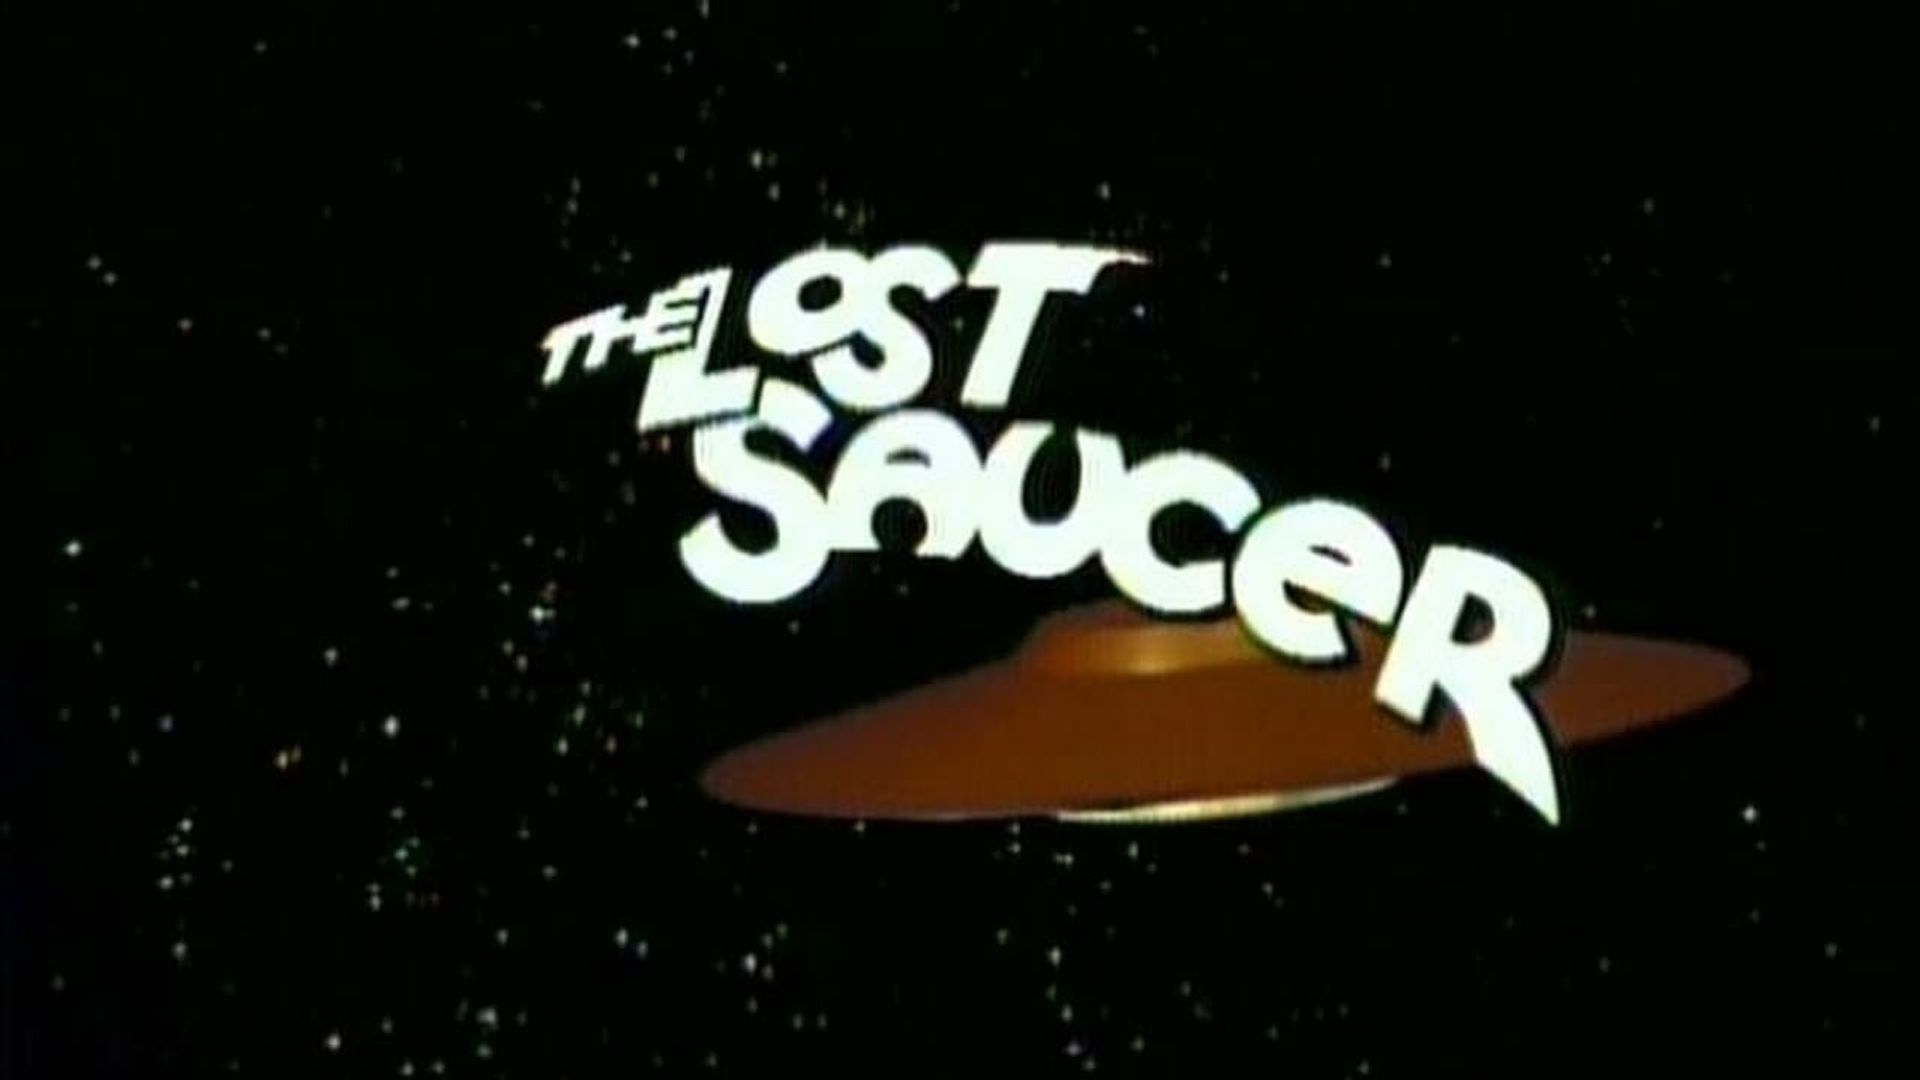 The Lost Saucer background